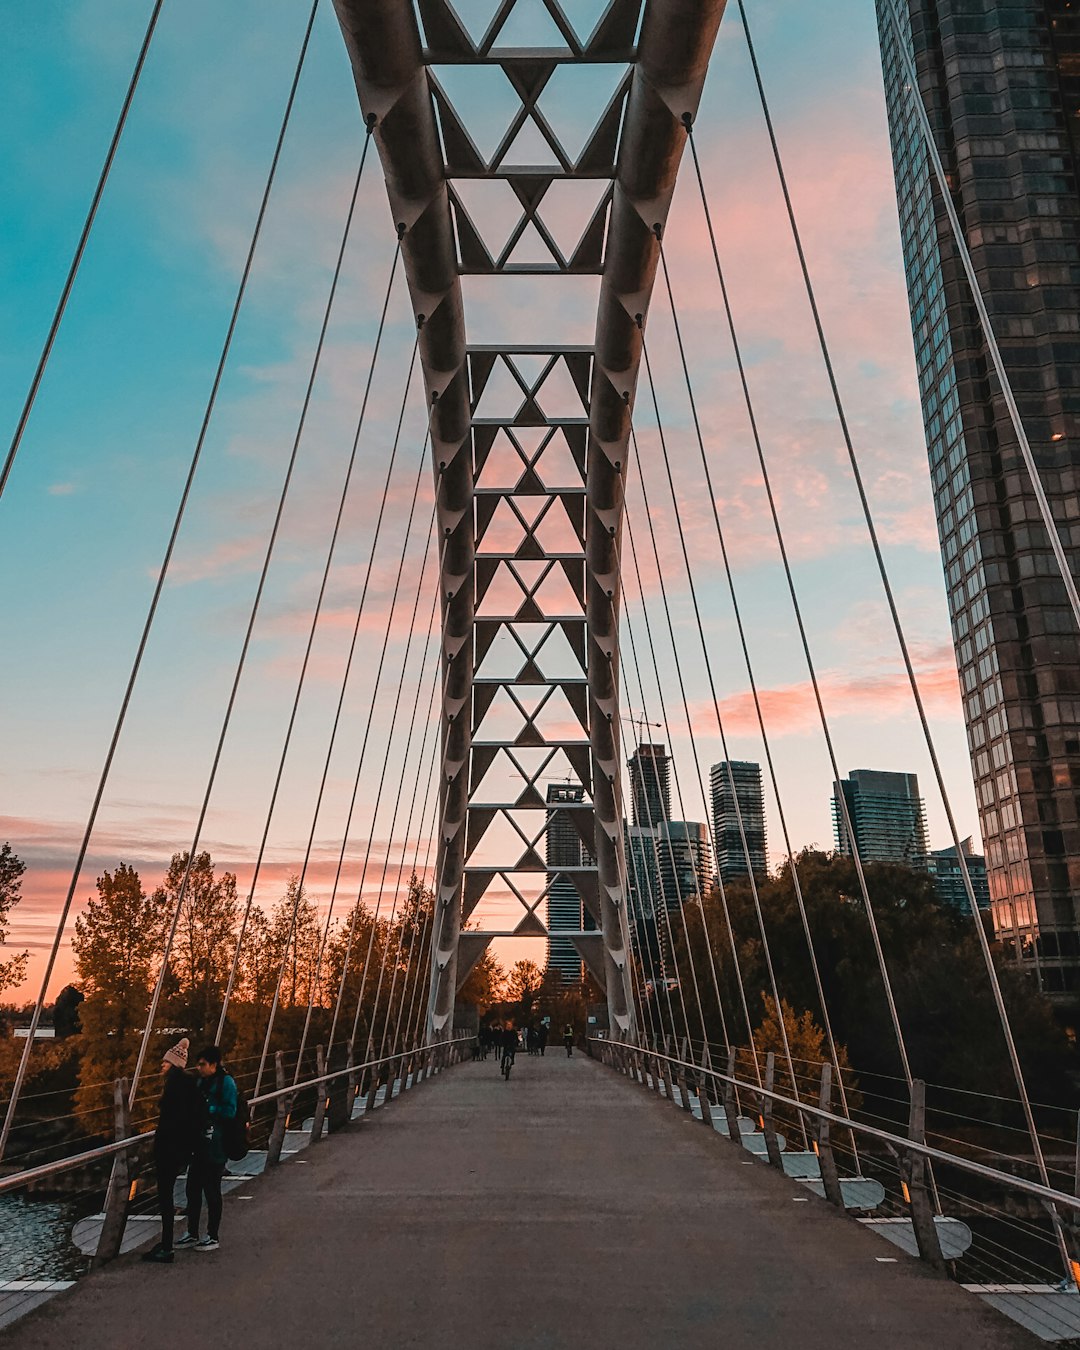 travelers stories about Suspension bridge in Humber Bay Arch Bridge, Canada